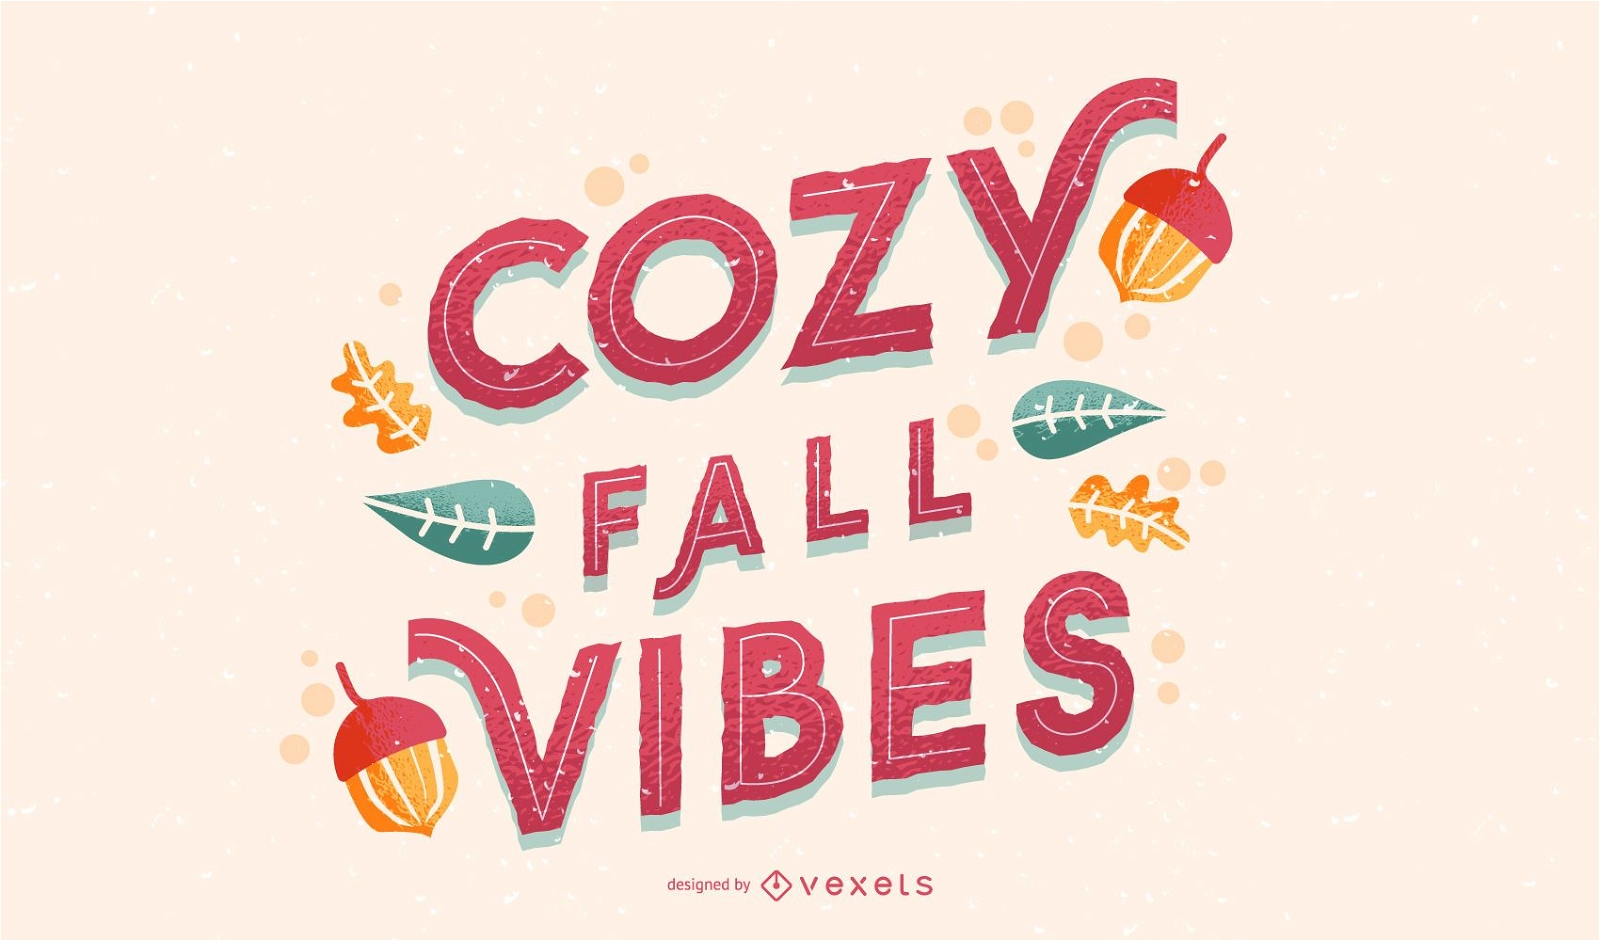 Cozy fall vibes lettering